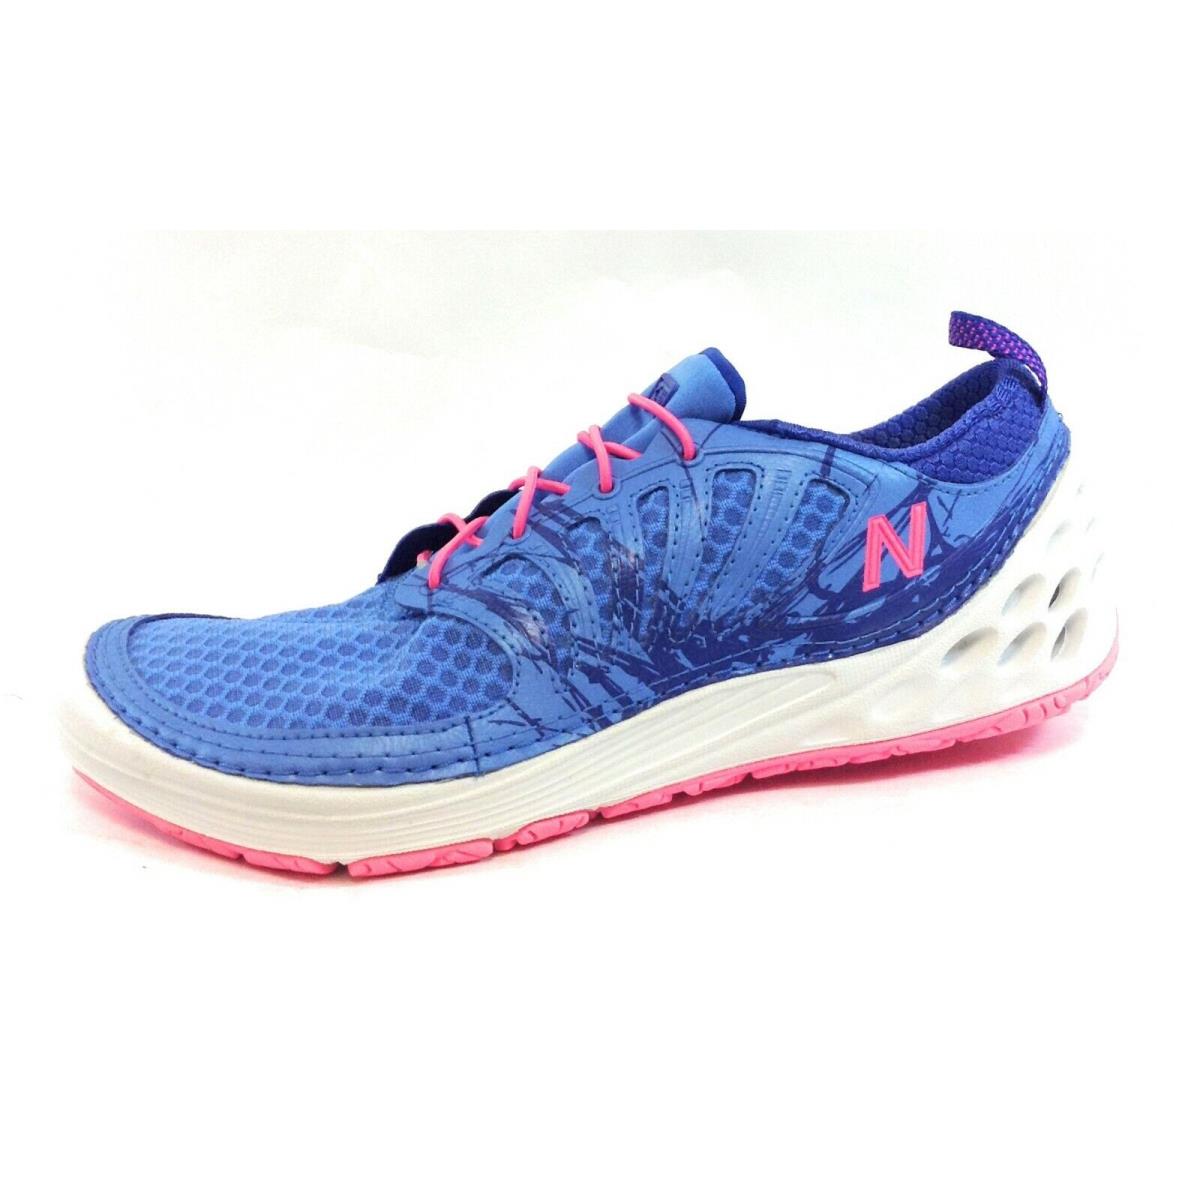 Womens New Balance 070 BB Blue Pink White Outdoor Water Sneakers Shoes